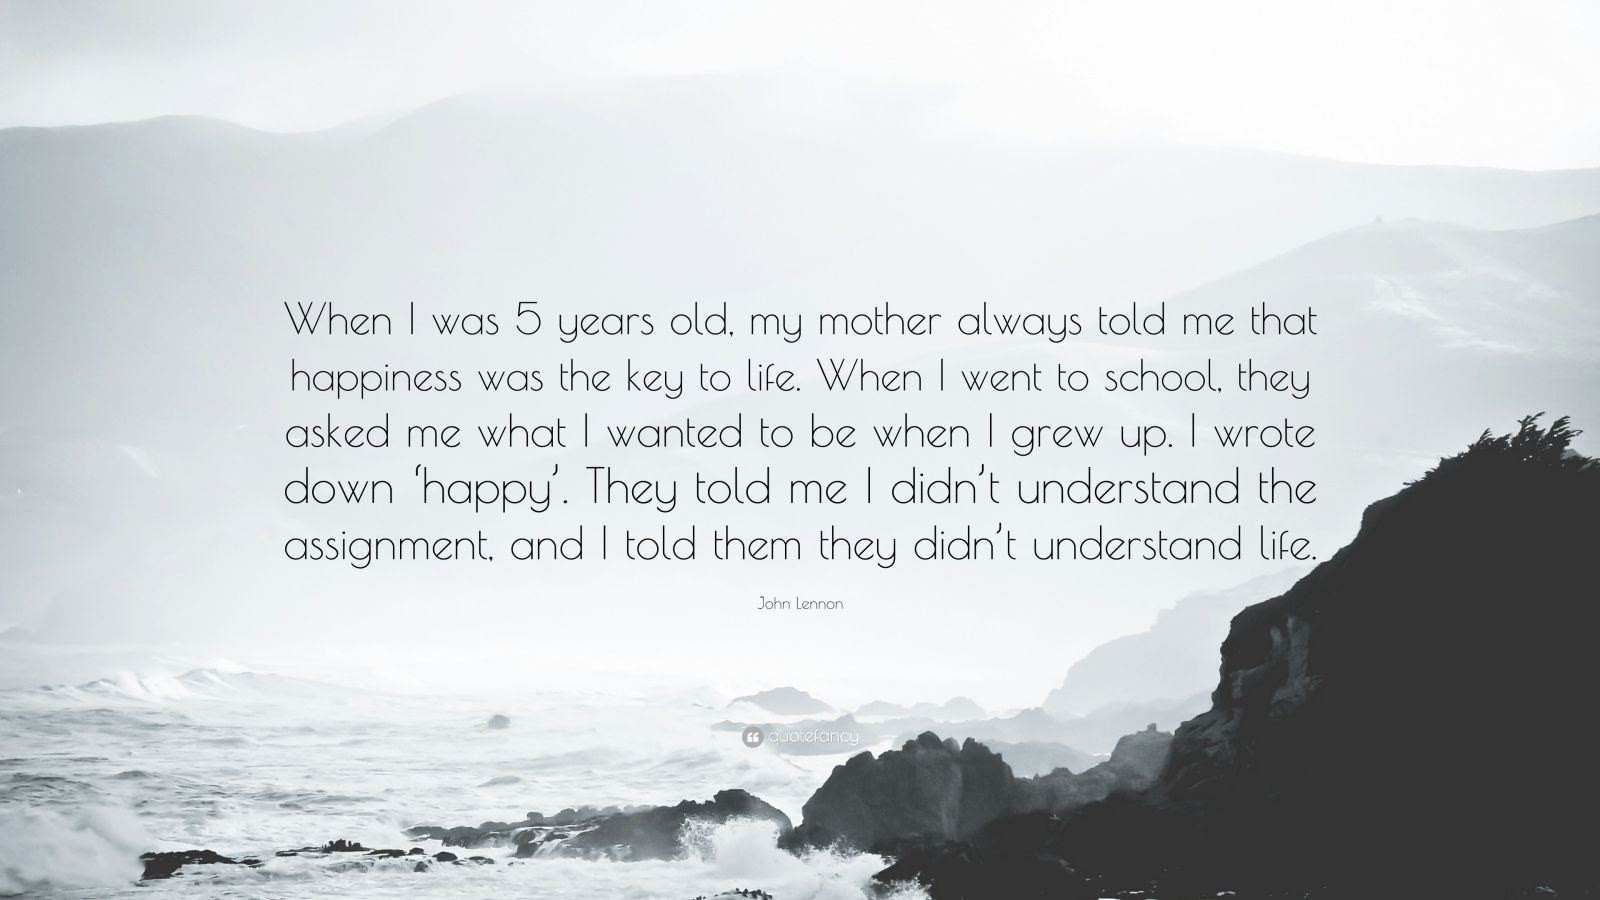 John Lennon Quote: “When I was 5 years old, my mother always told me that  happiness was the key to life. When I went to school, they asked m...”